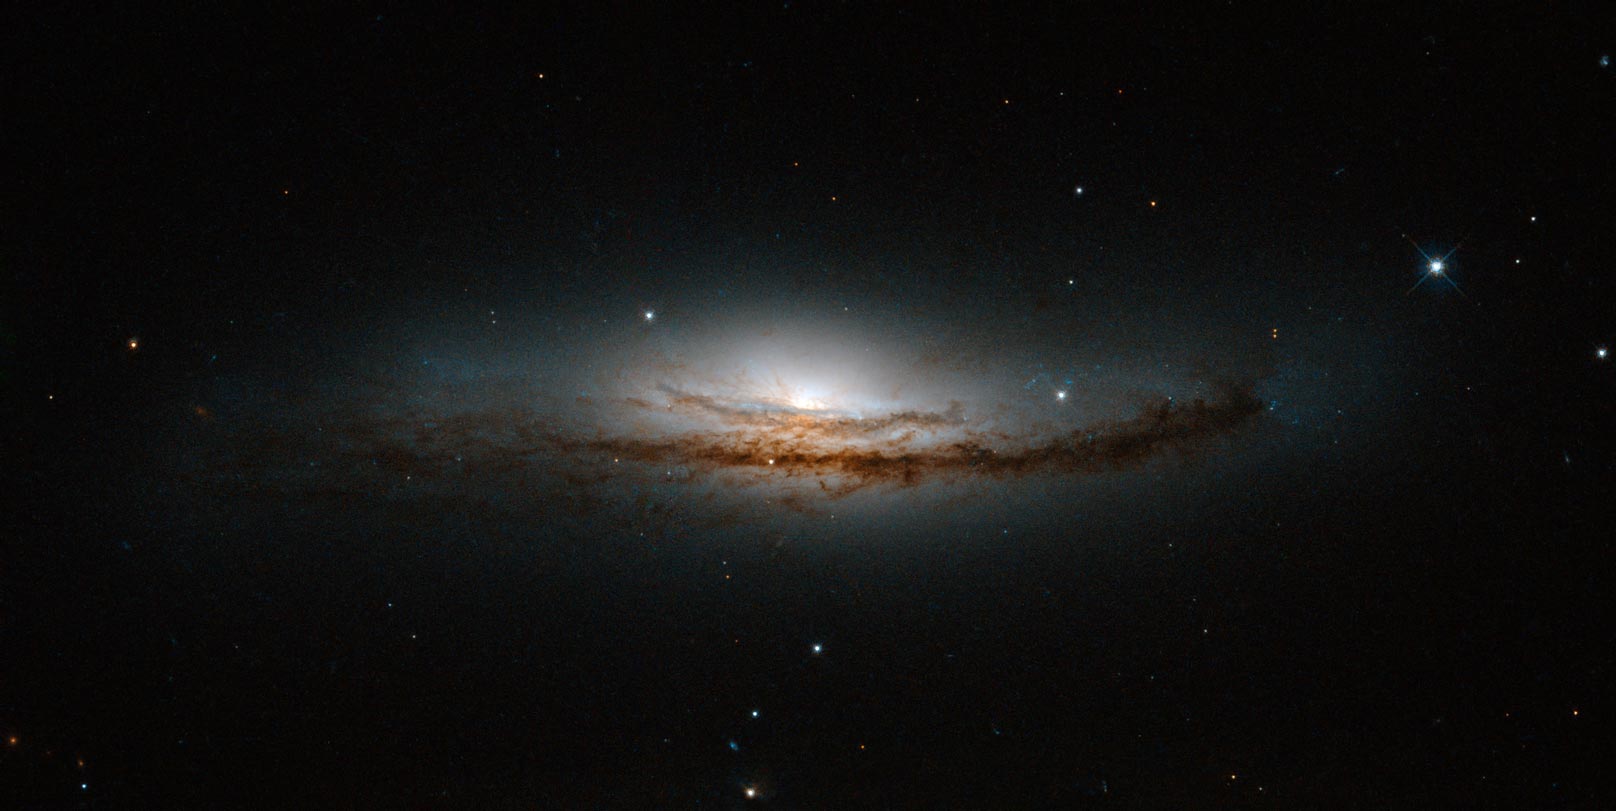 NGC 5793 is a Seyfert galaxy. These galaxies have incredibly luminous centres that are thought to be caused by hungry supermassive black holes — black holes that can be billions of times the size of the Sun — that pull in and devour gas and dust from their surroundings.